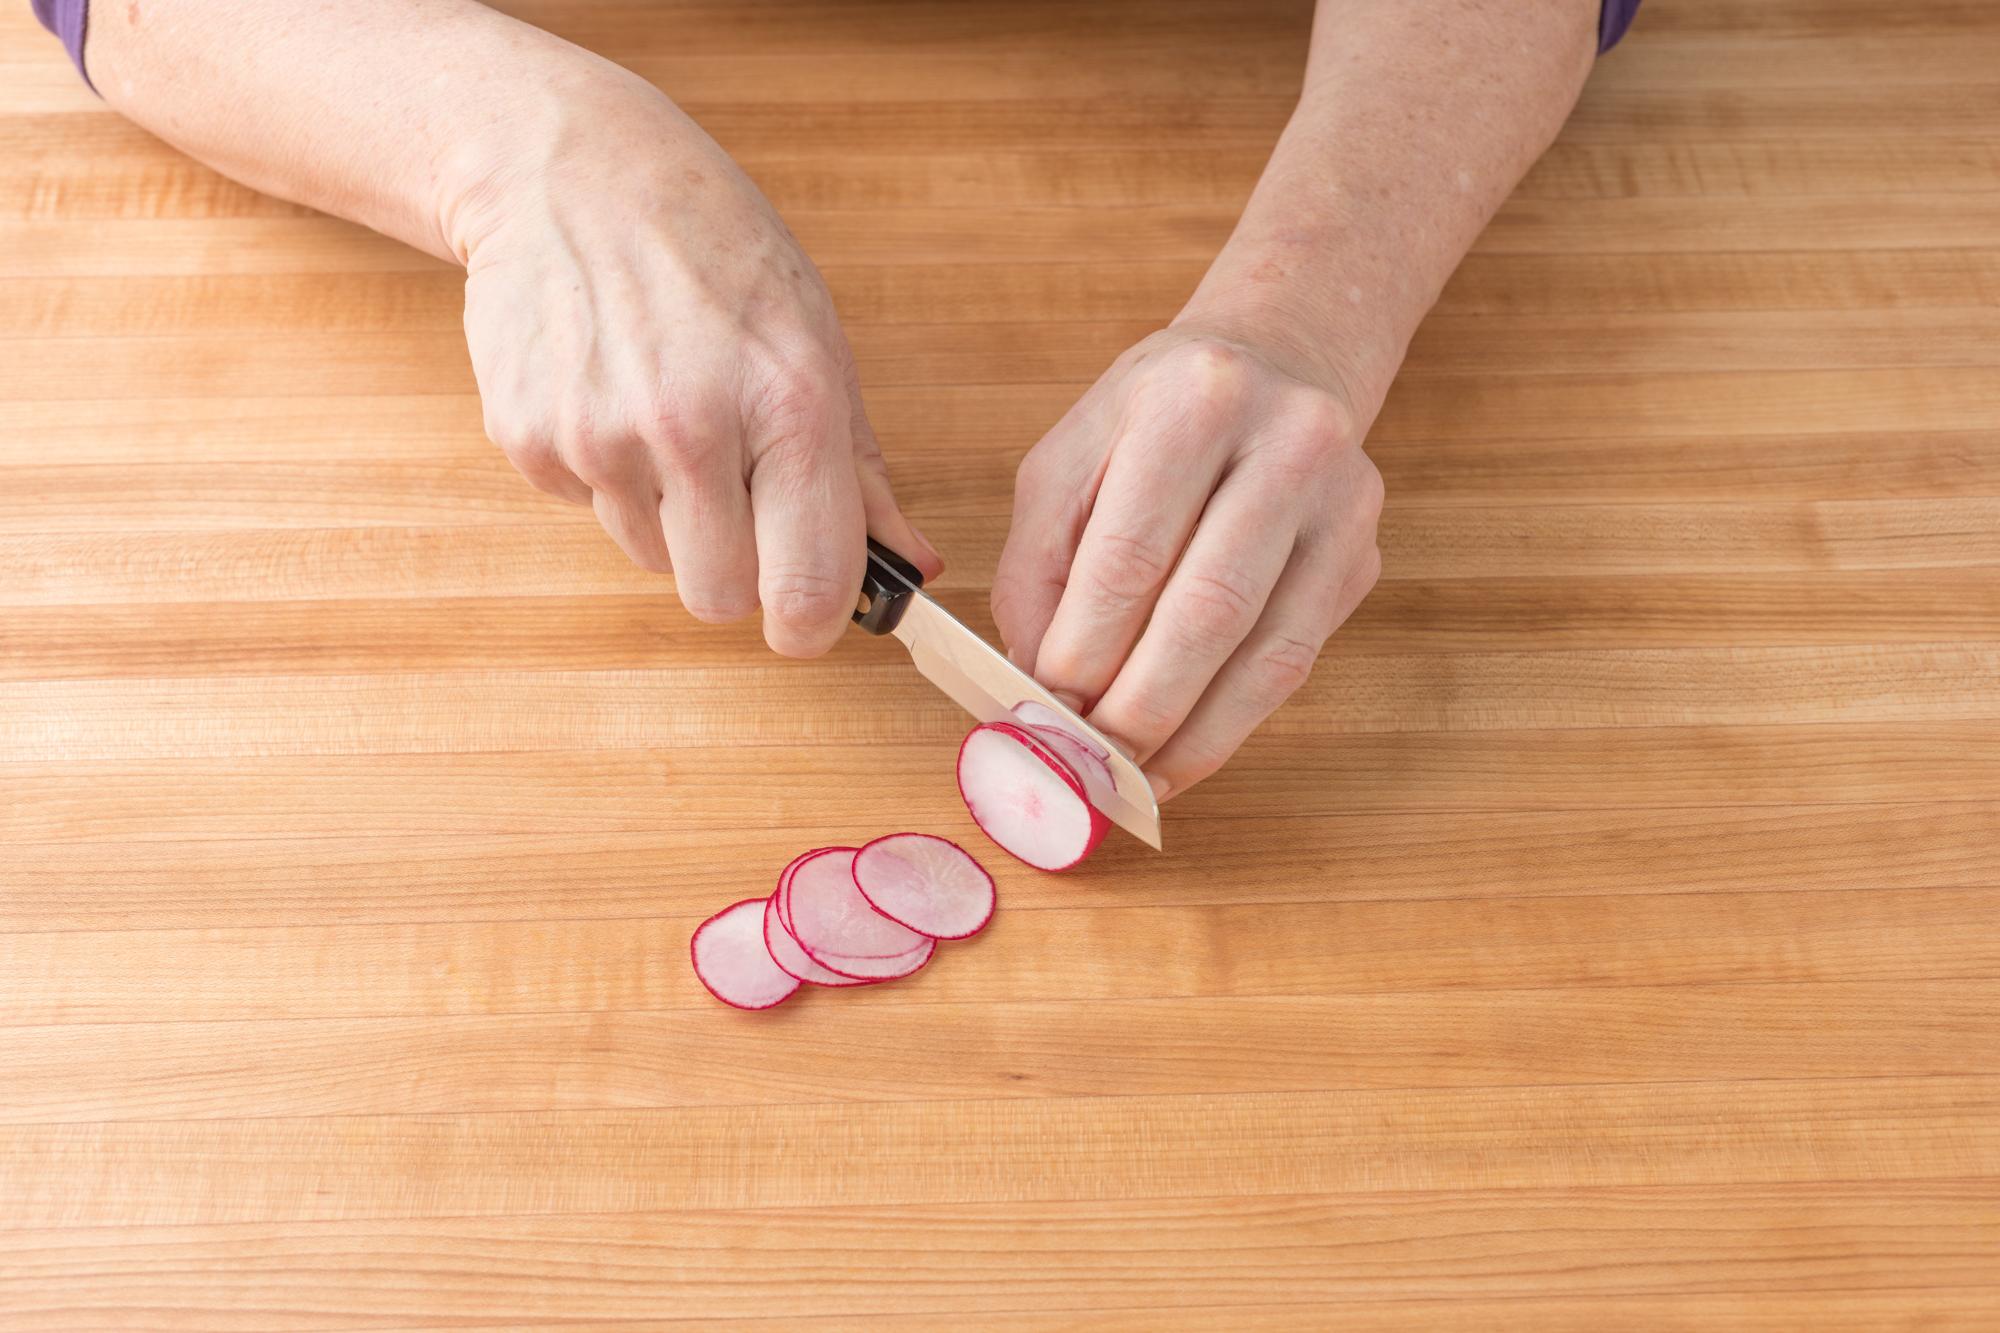 Using a Santoku-Style Paring Knife to thinly slice the radish.